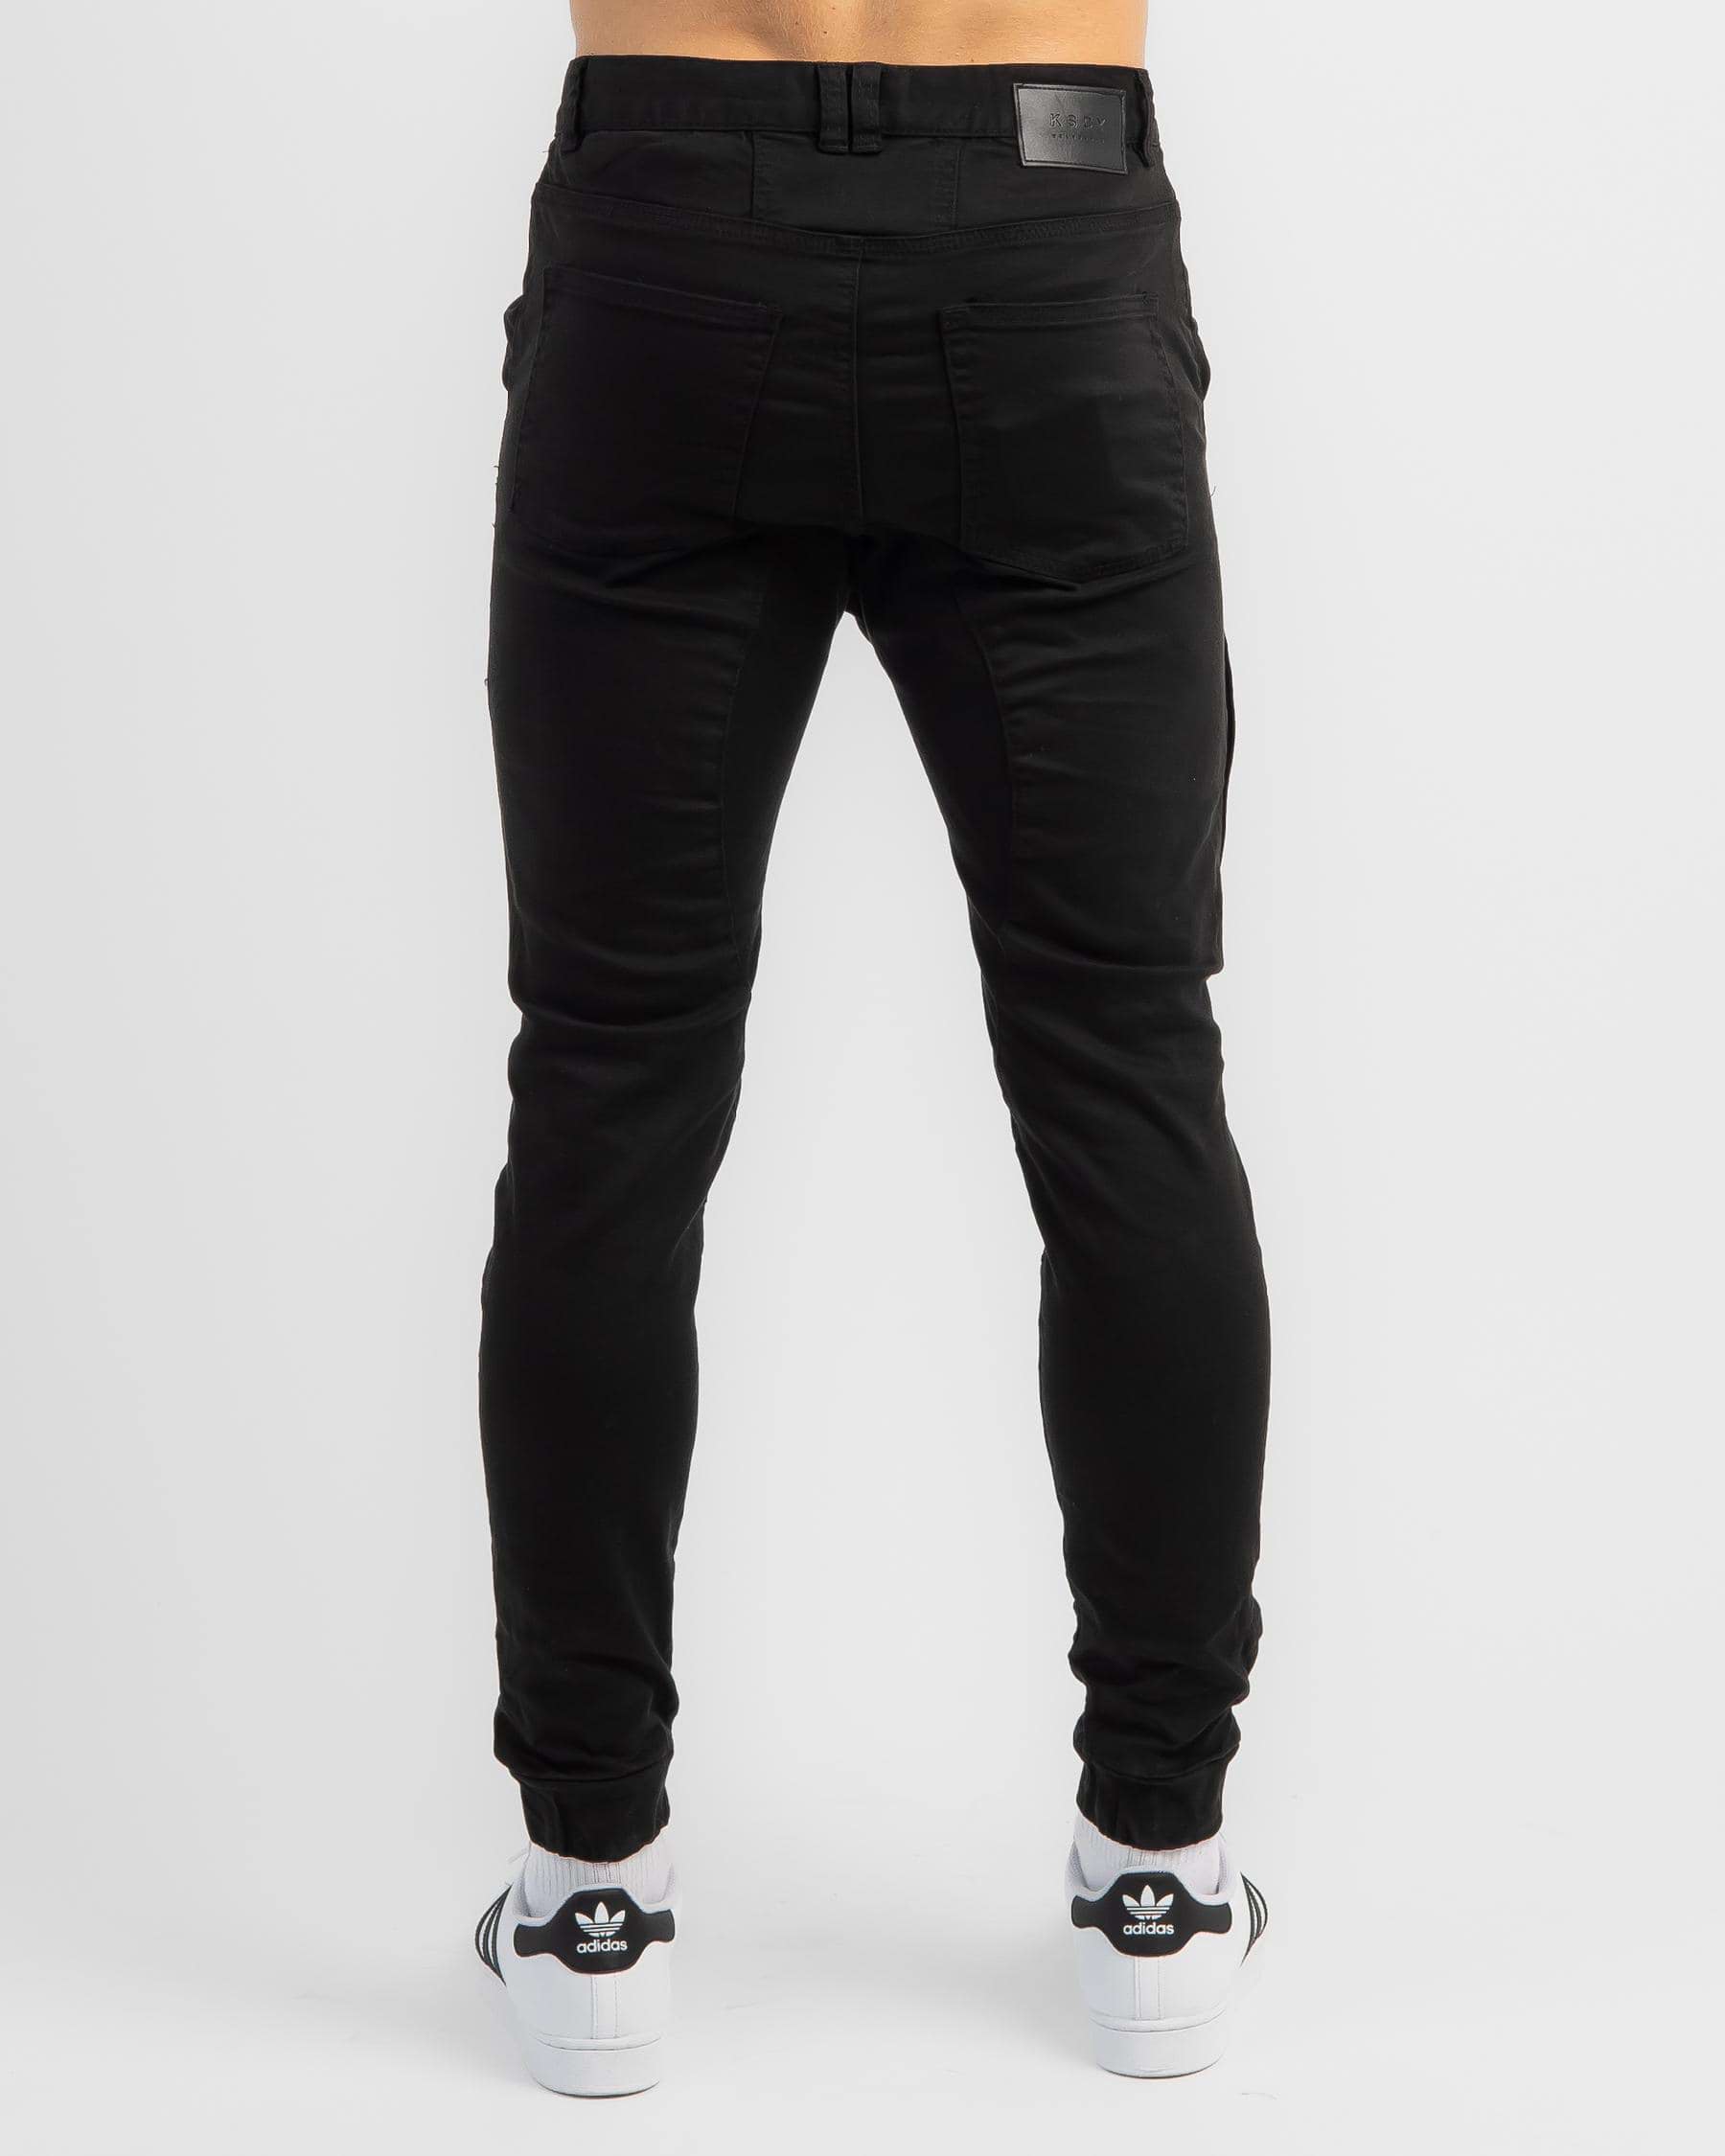 Kiss Chacey Spartan Denim Jogger Pants In Jet Black - Fast Shipping ...